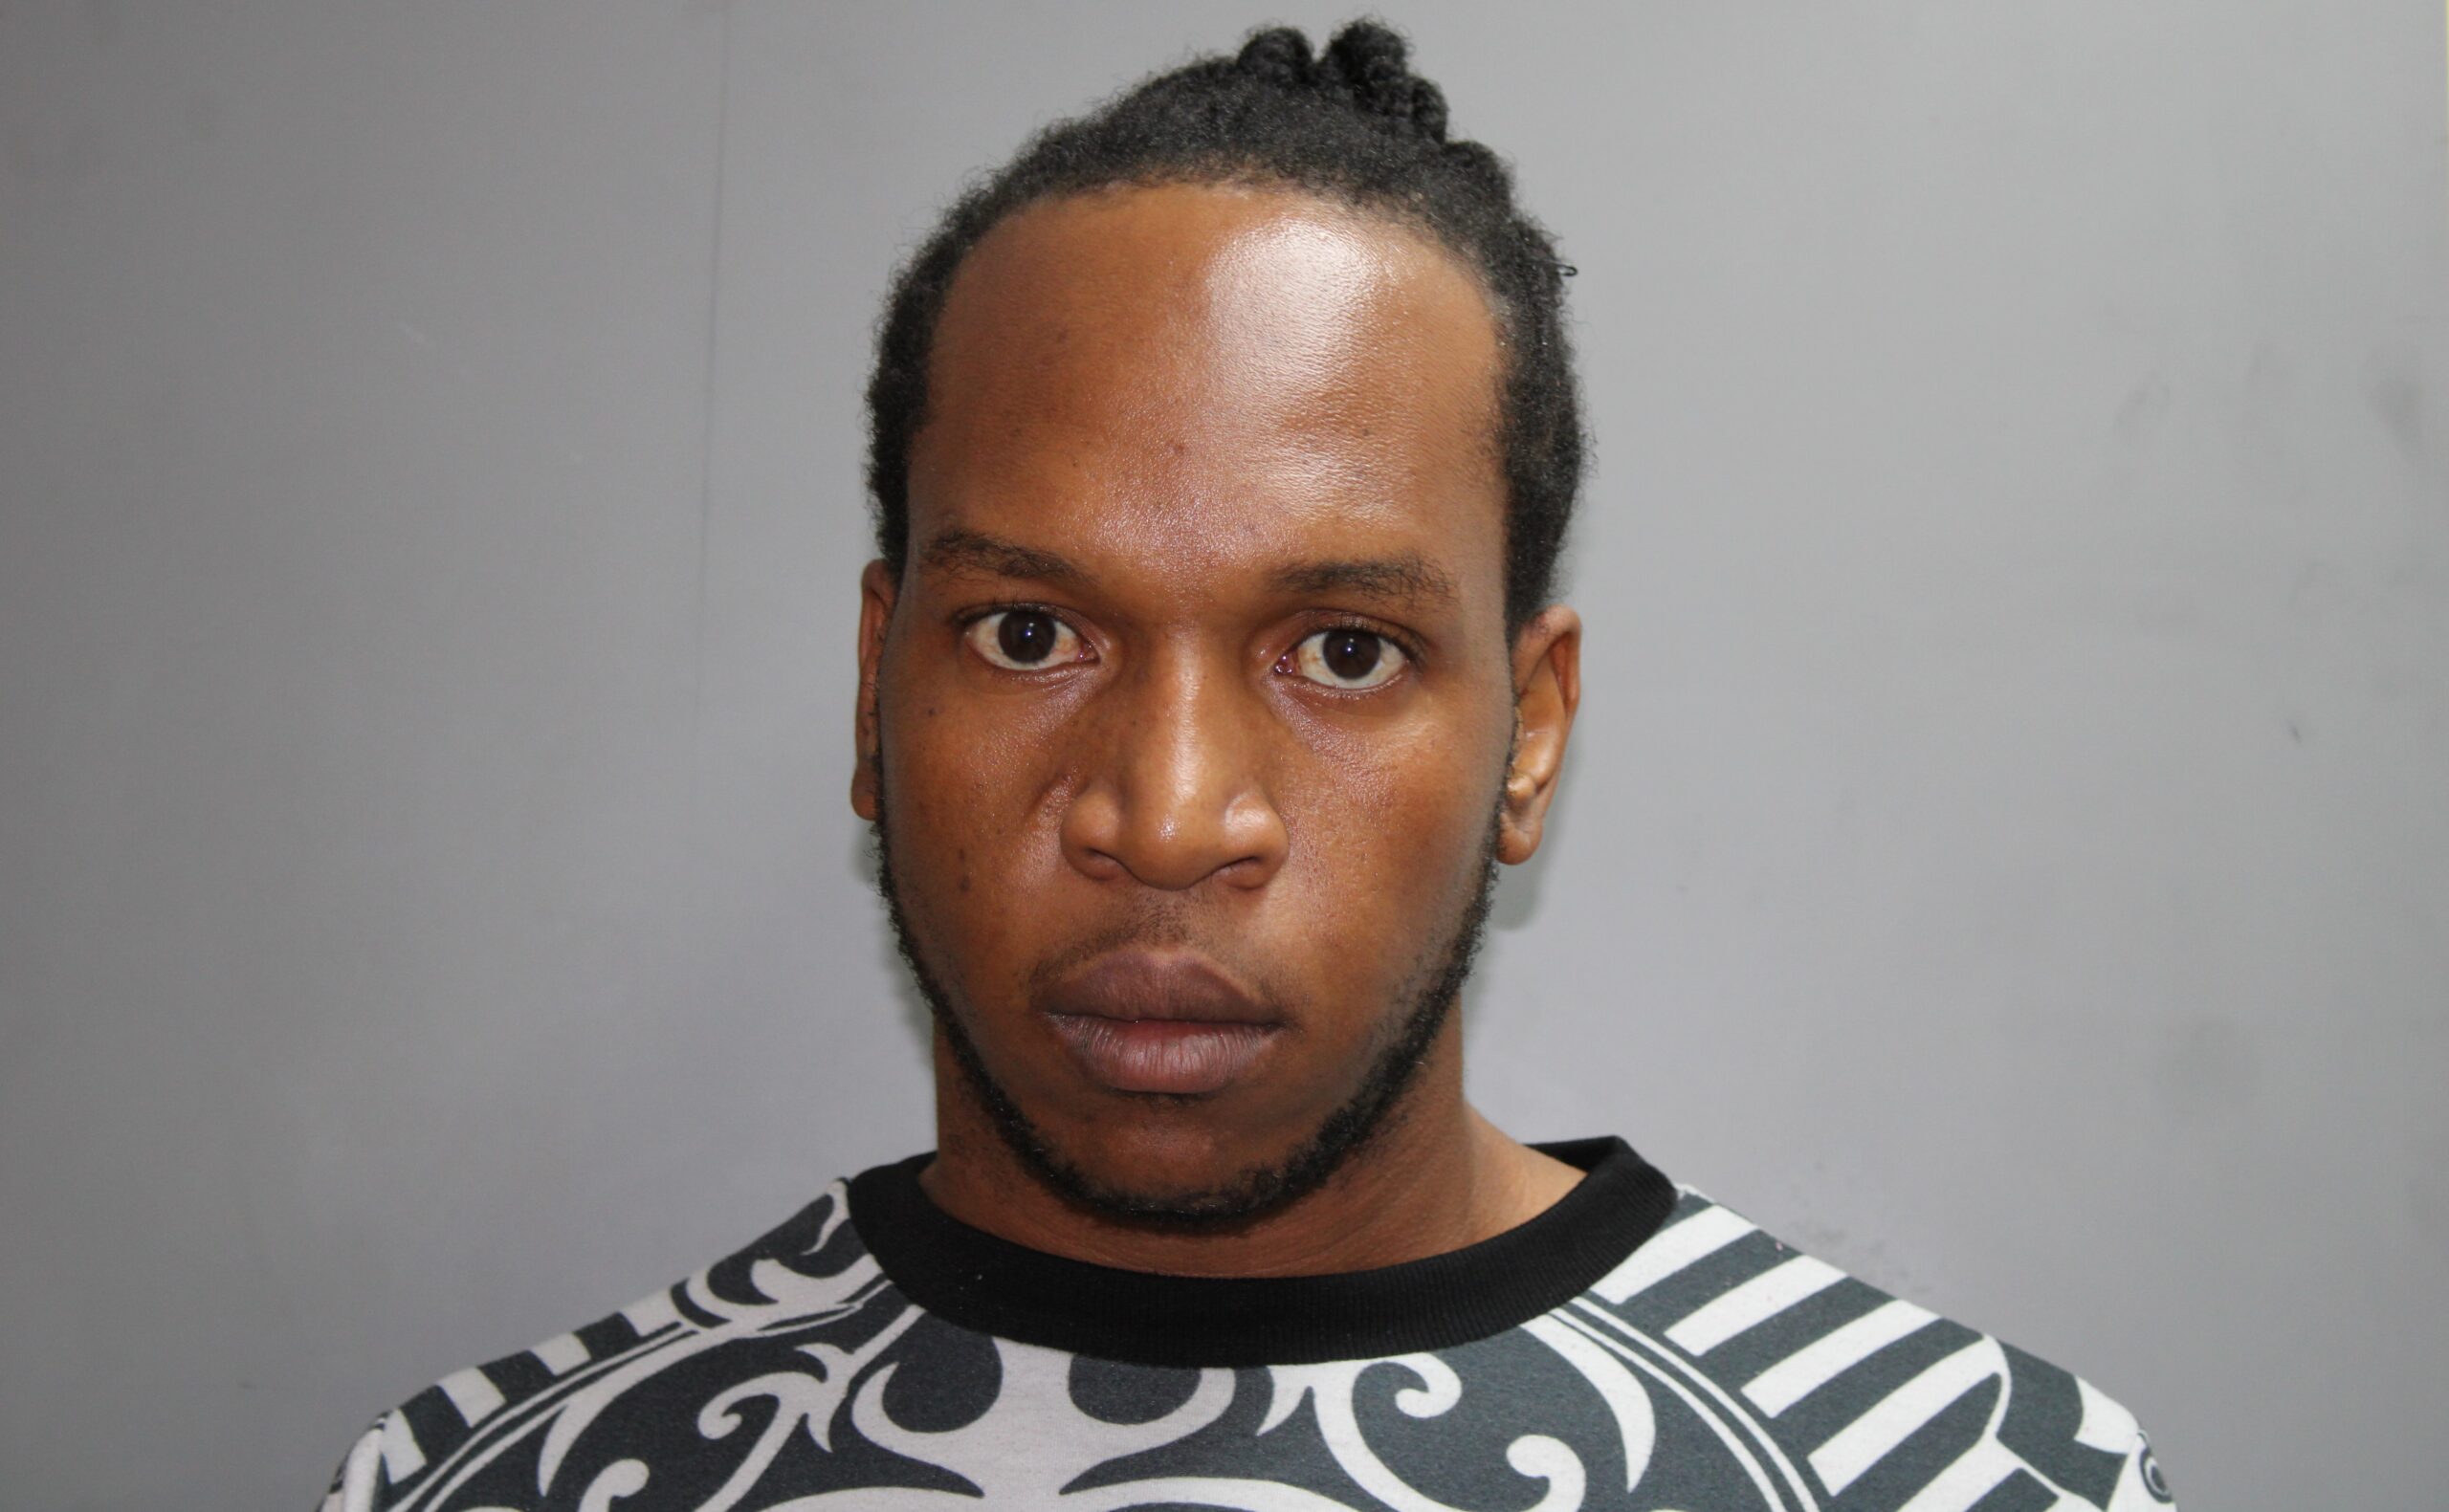 St. Croix Homeless Man Arrested On Rape Charges After Brutal Sexual Assault, Beating Of Woman: VIPD